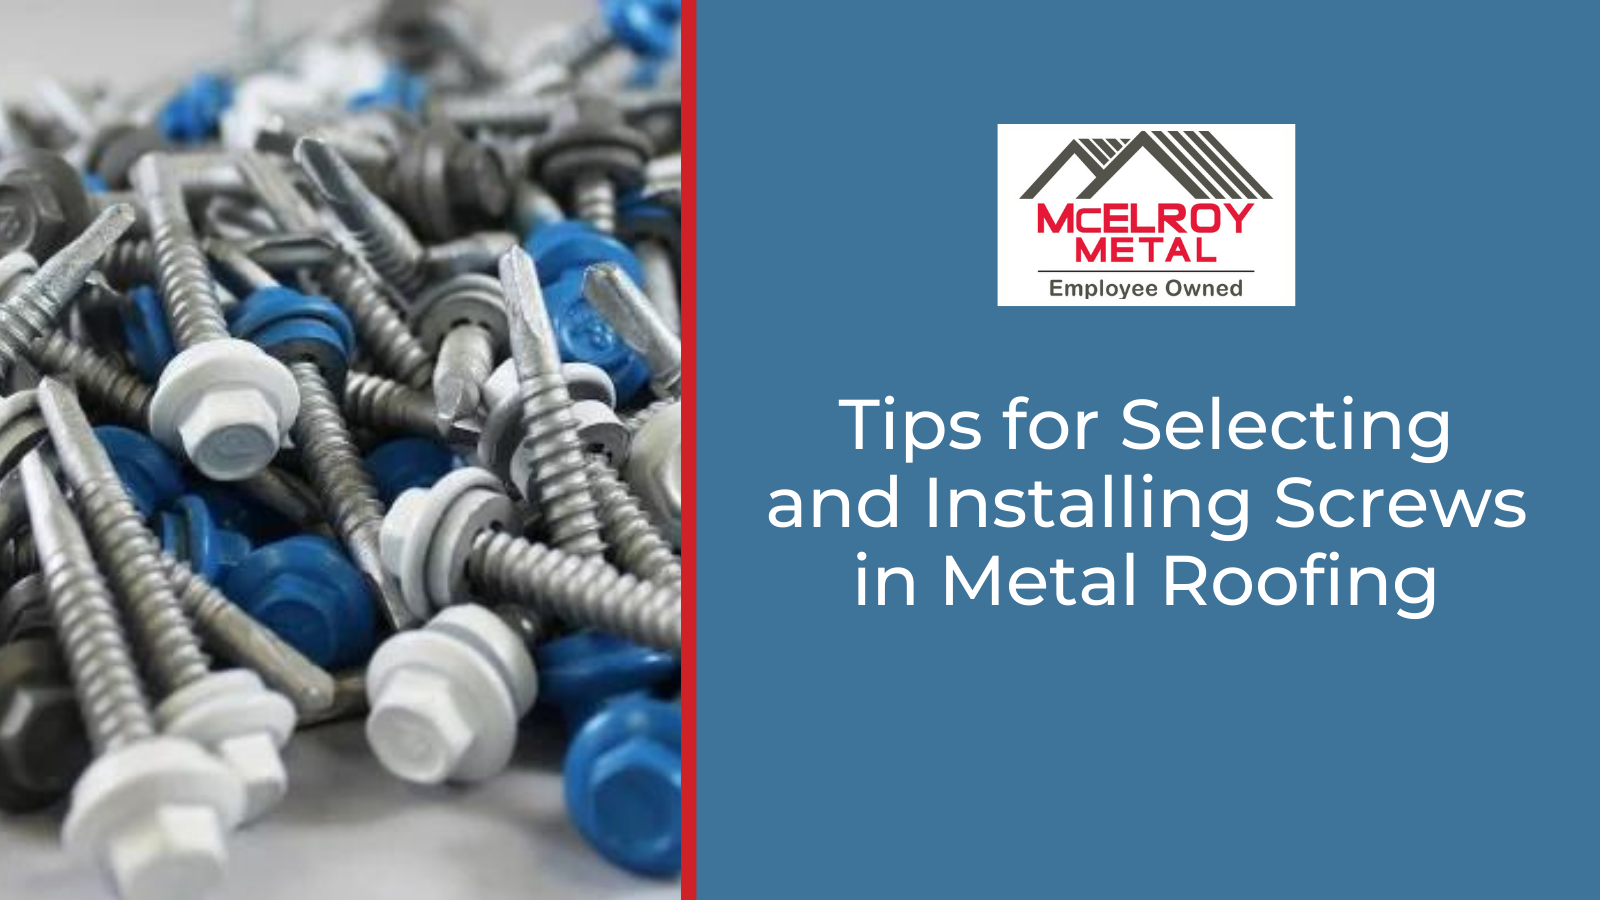 Tips for Selecting and Installing Screws in Metal Roofing